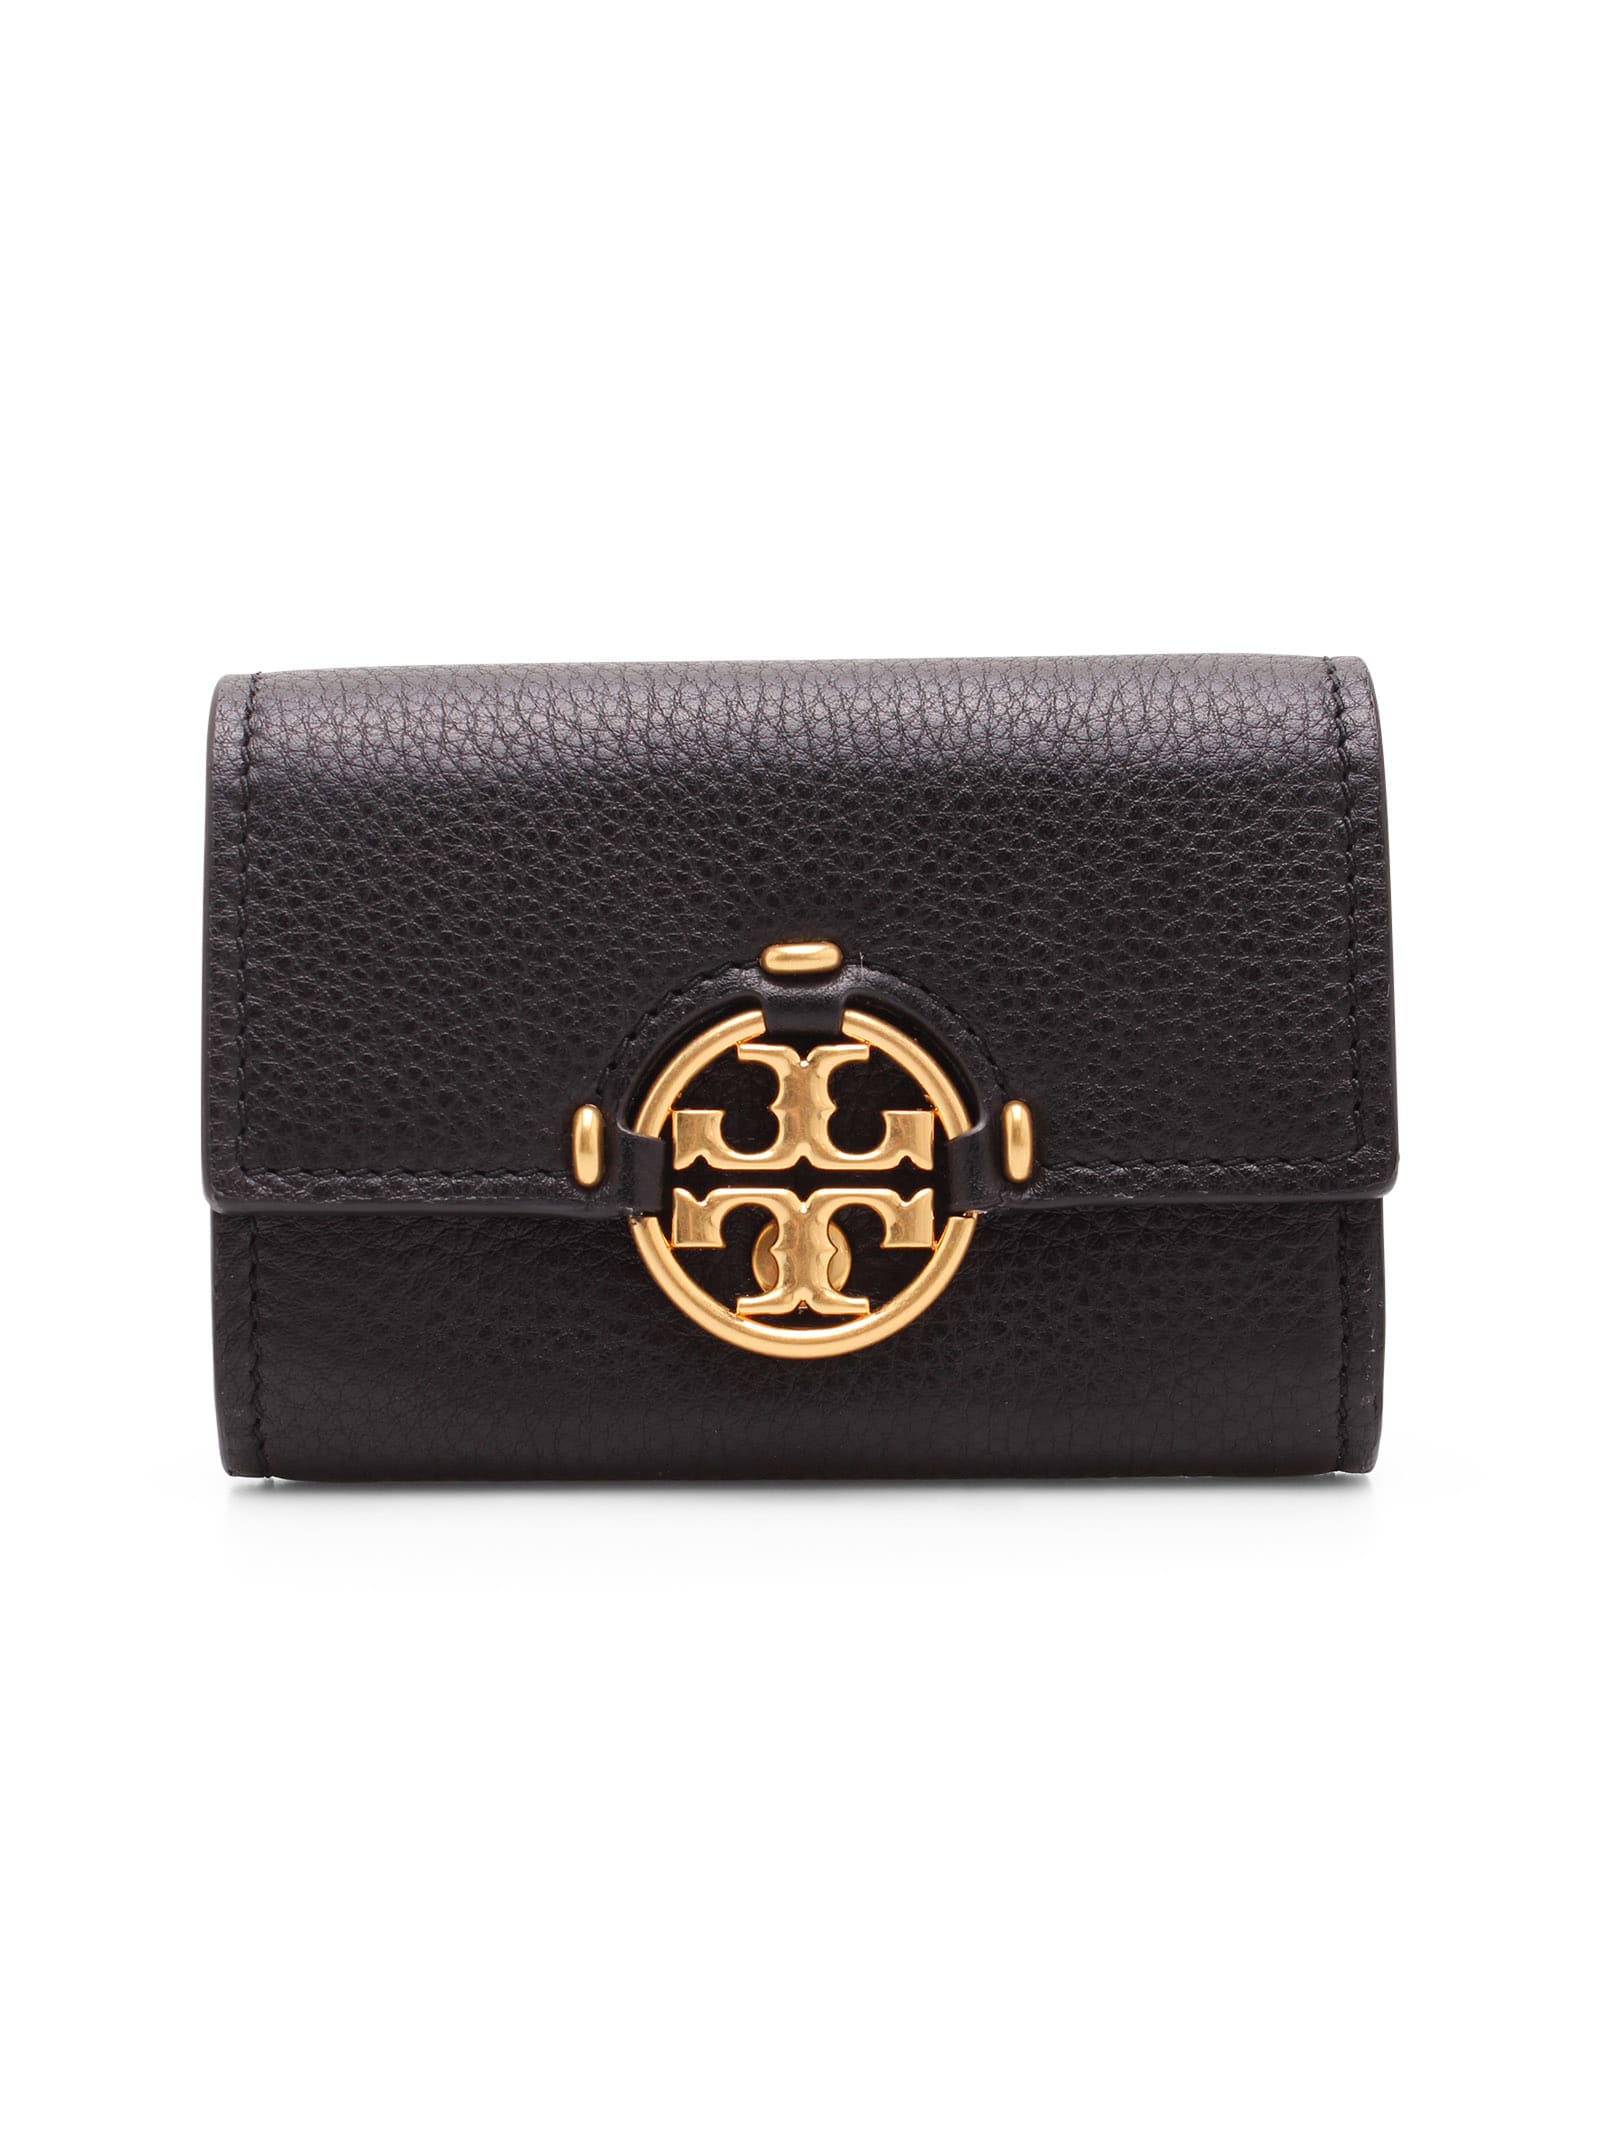 Tory Burch miller Mini Leather Wallet